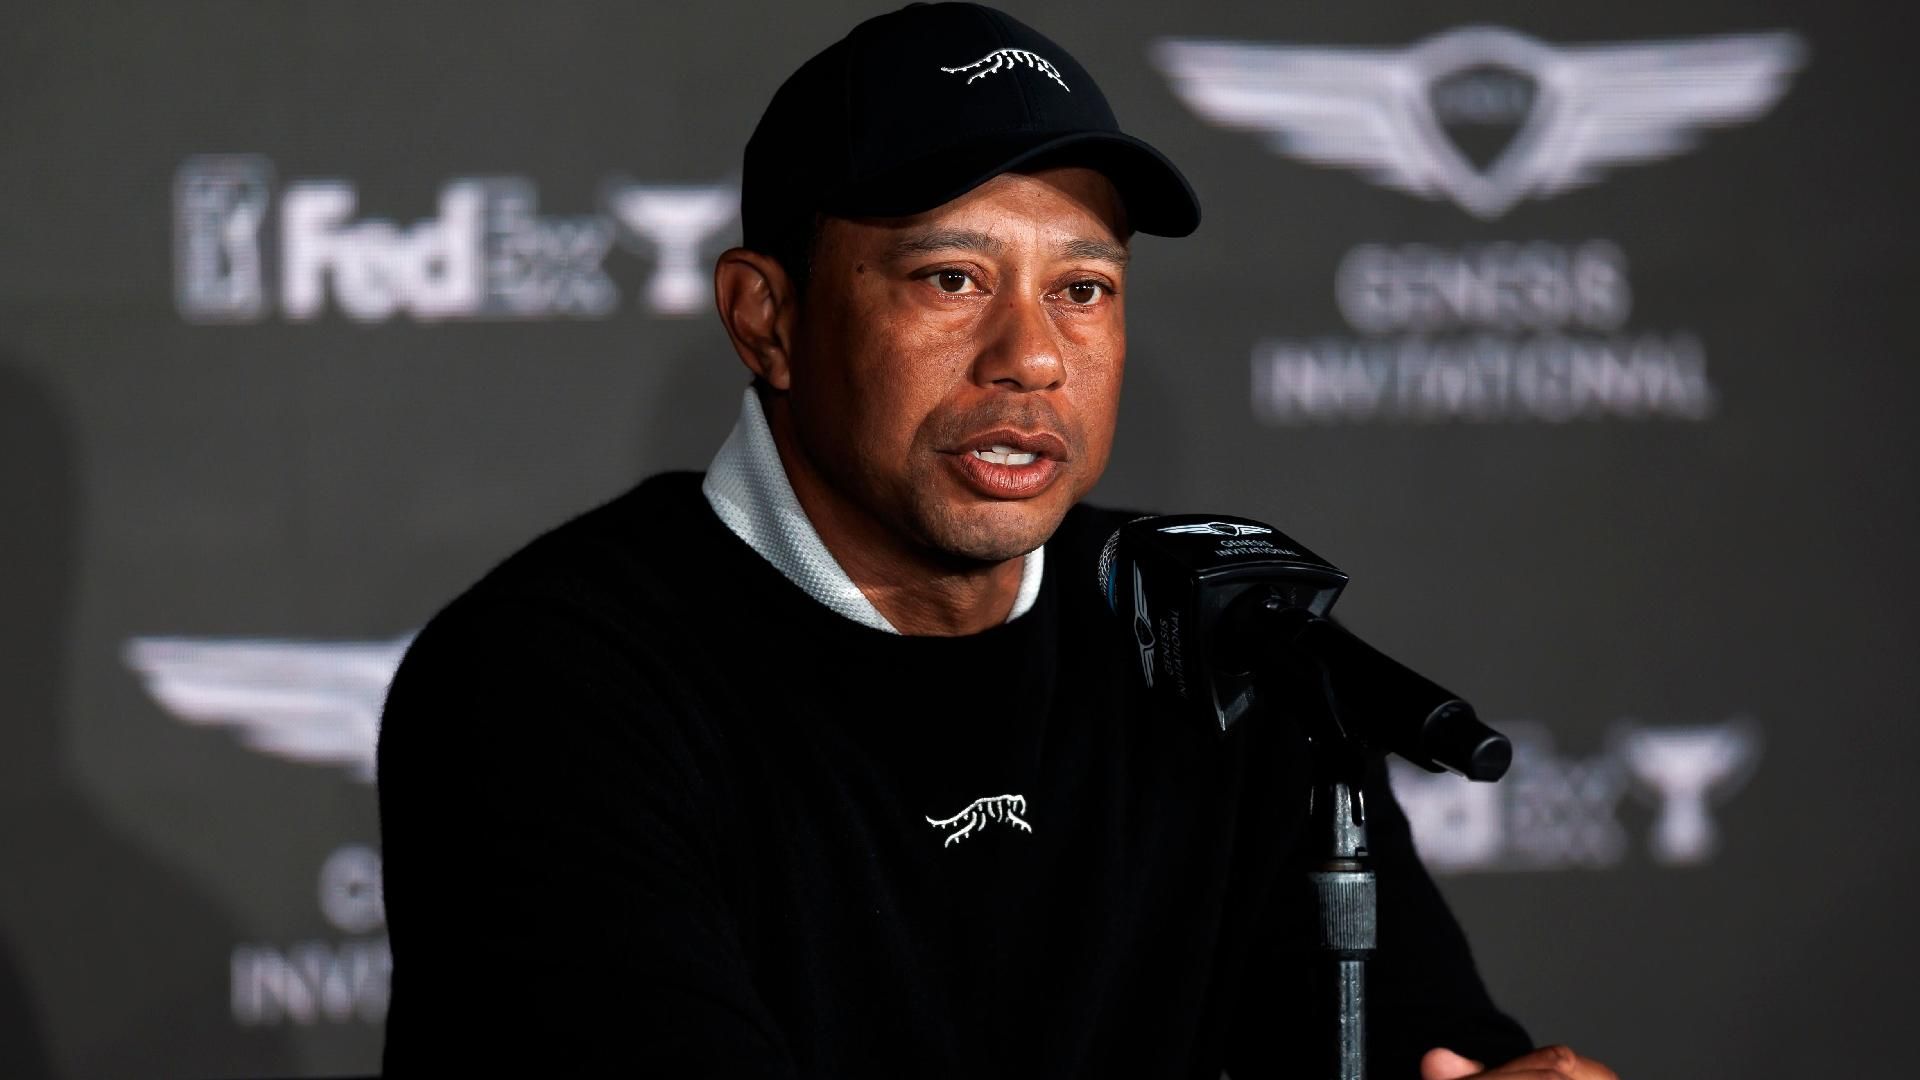 Tiger Woods: Golf is my eternal passion